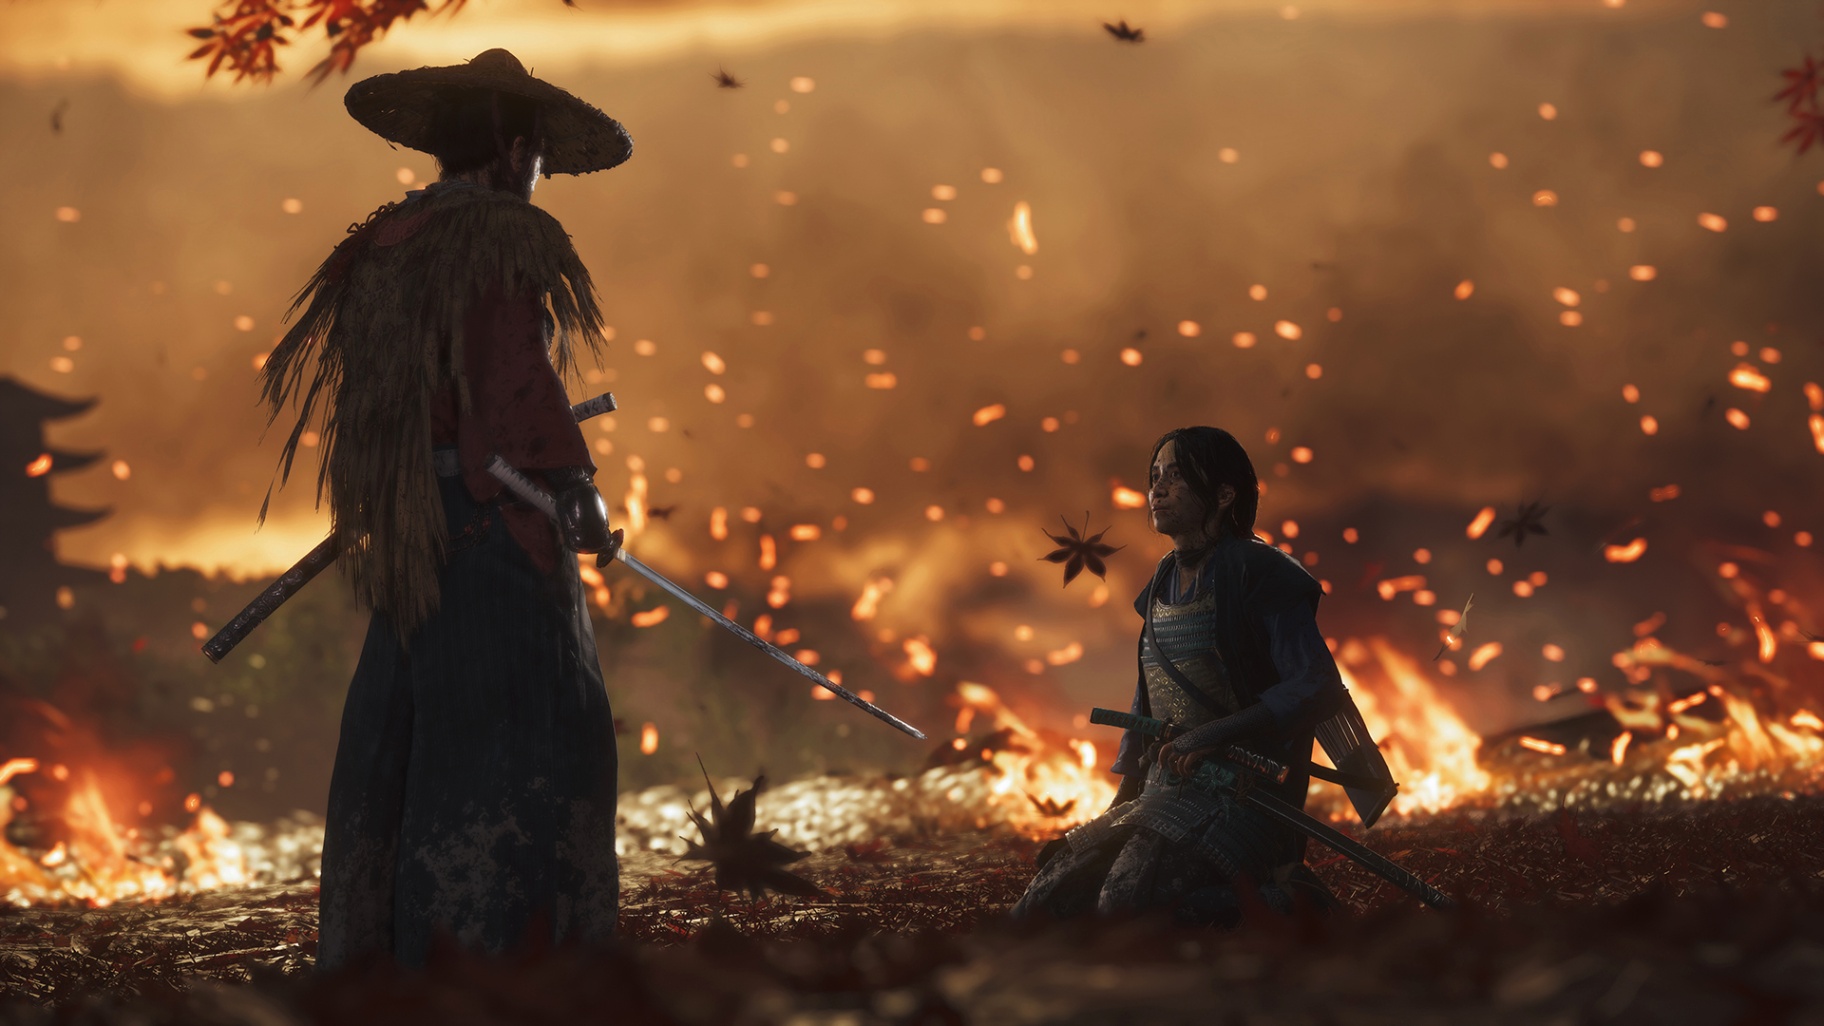 Ghost of Tsushima - Discover this Game Inspired by Japanese Mythology